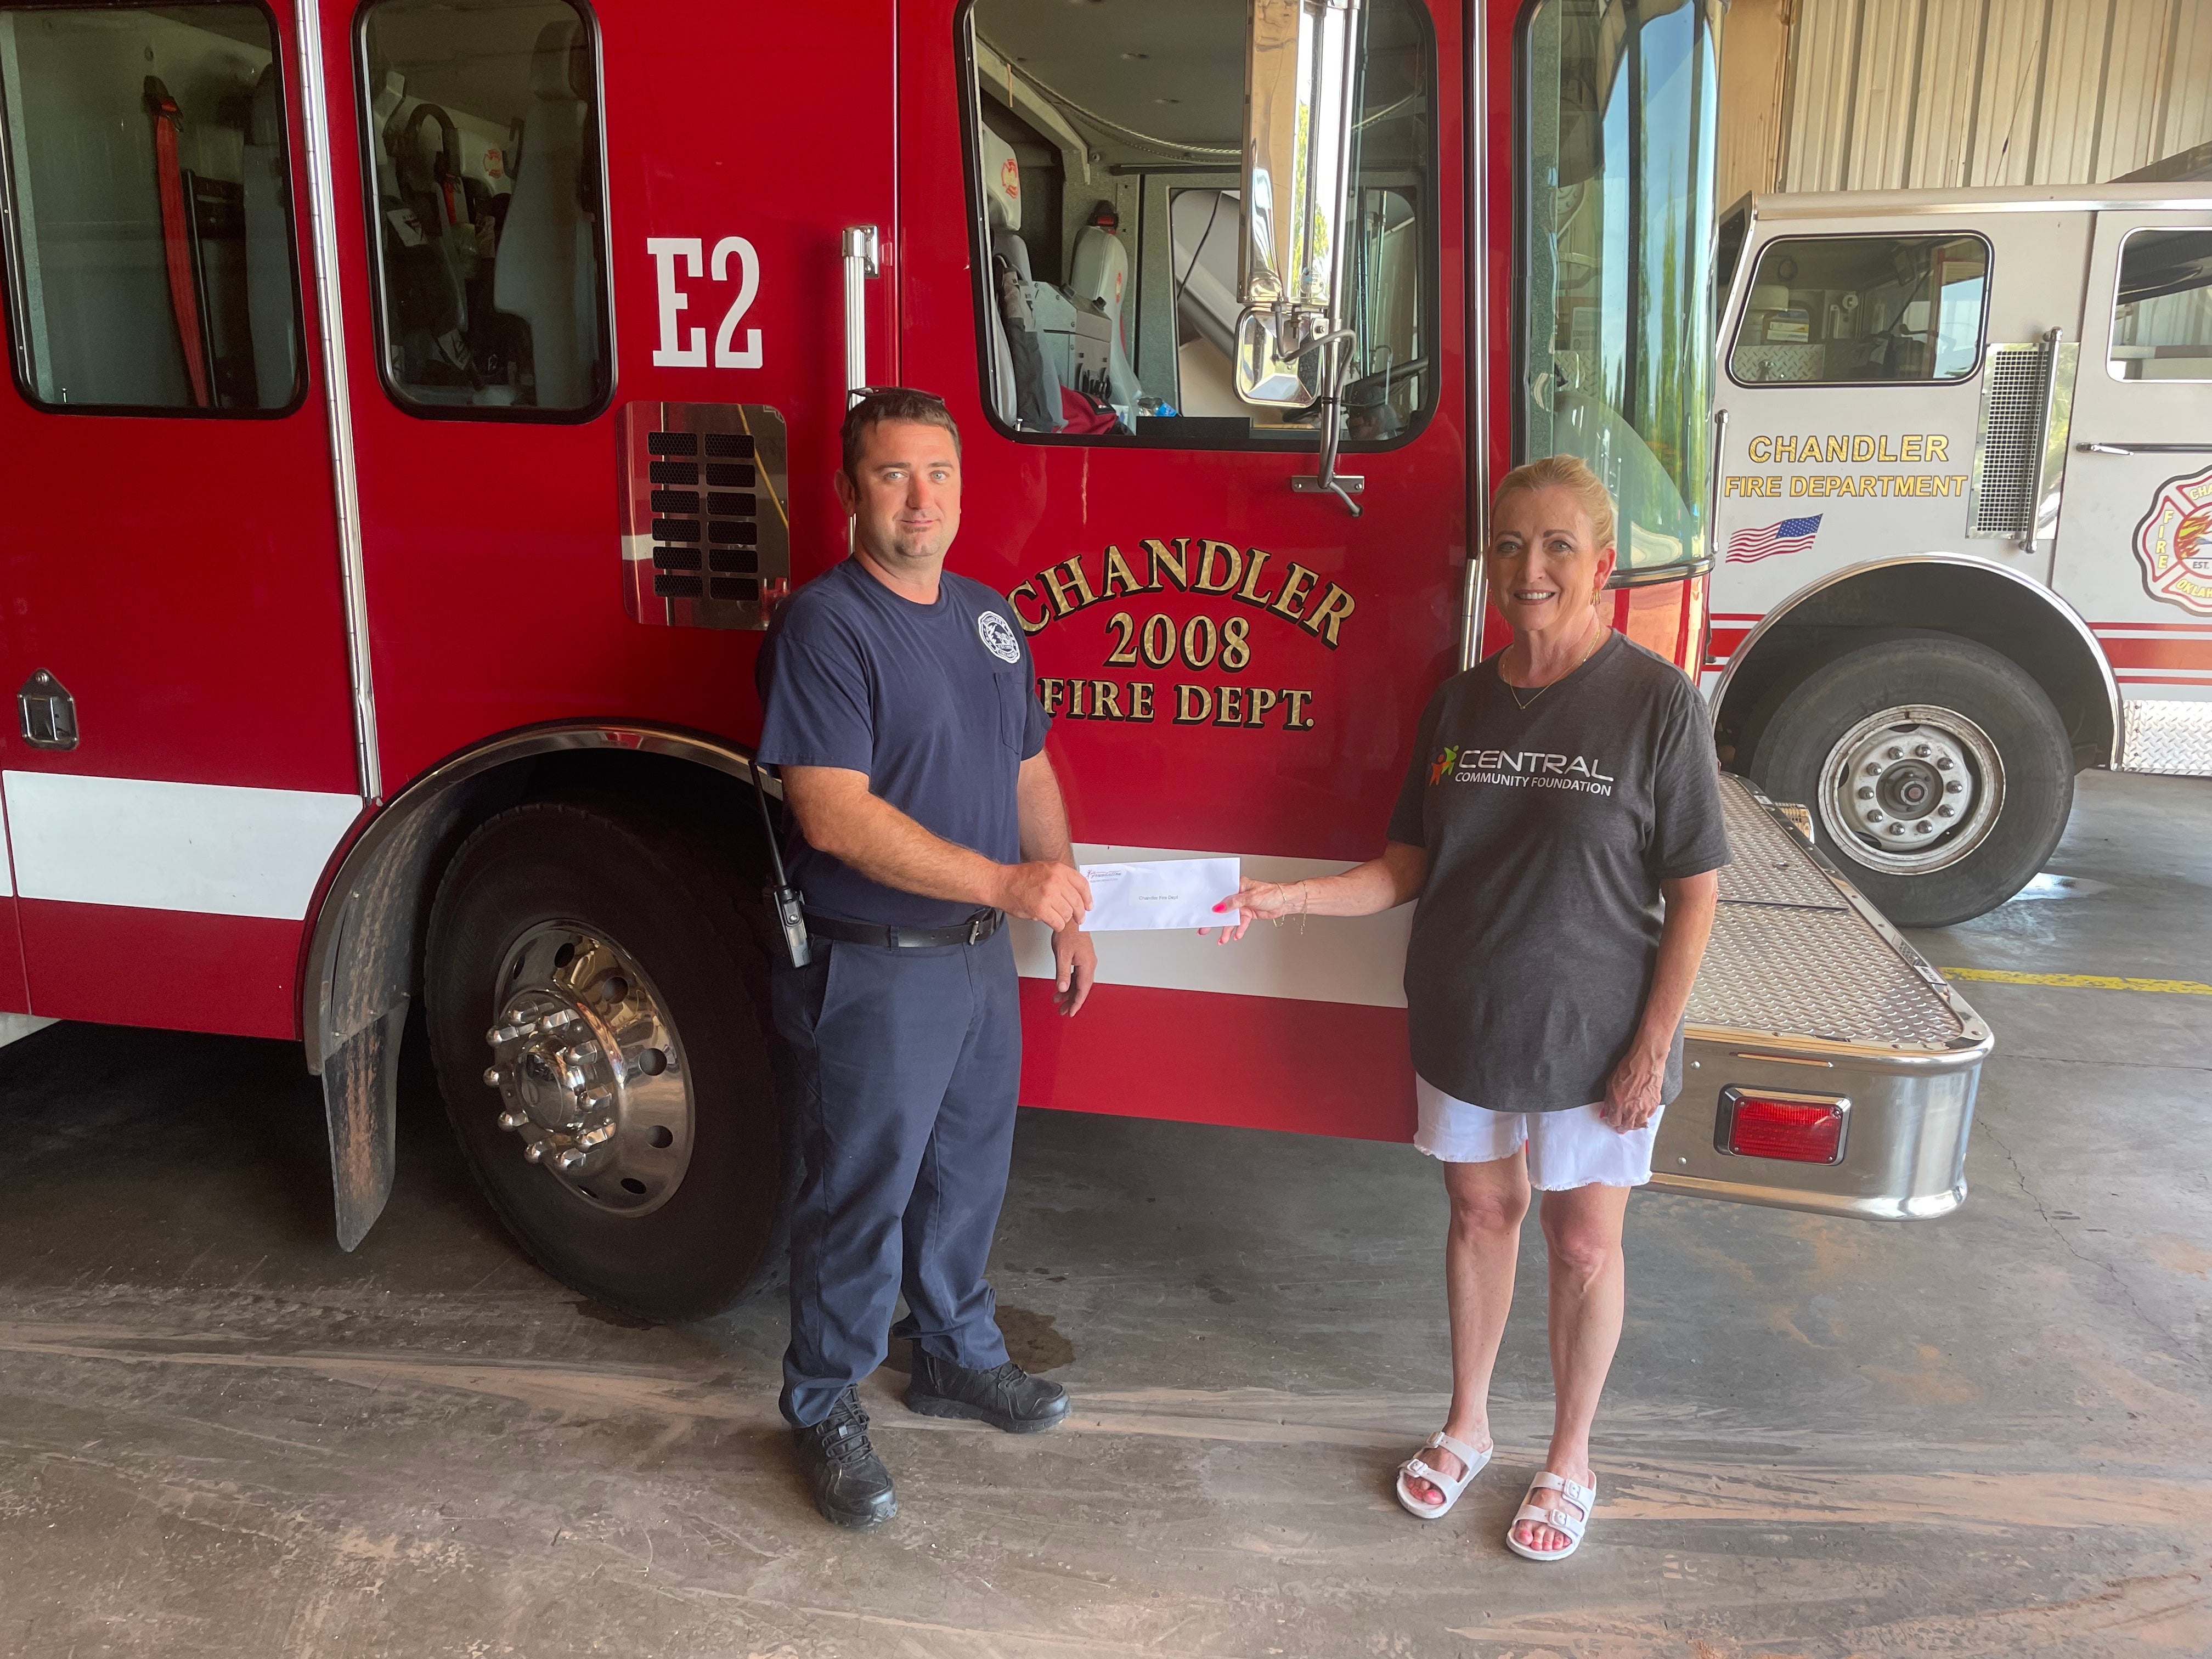 Pictured are Bobby Buchanan, Chandler Fire Department fire chief and Gretchen Harlow, Central Community Foundation director.